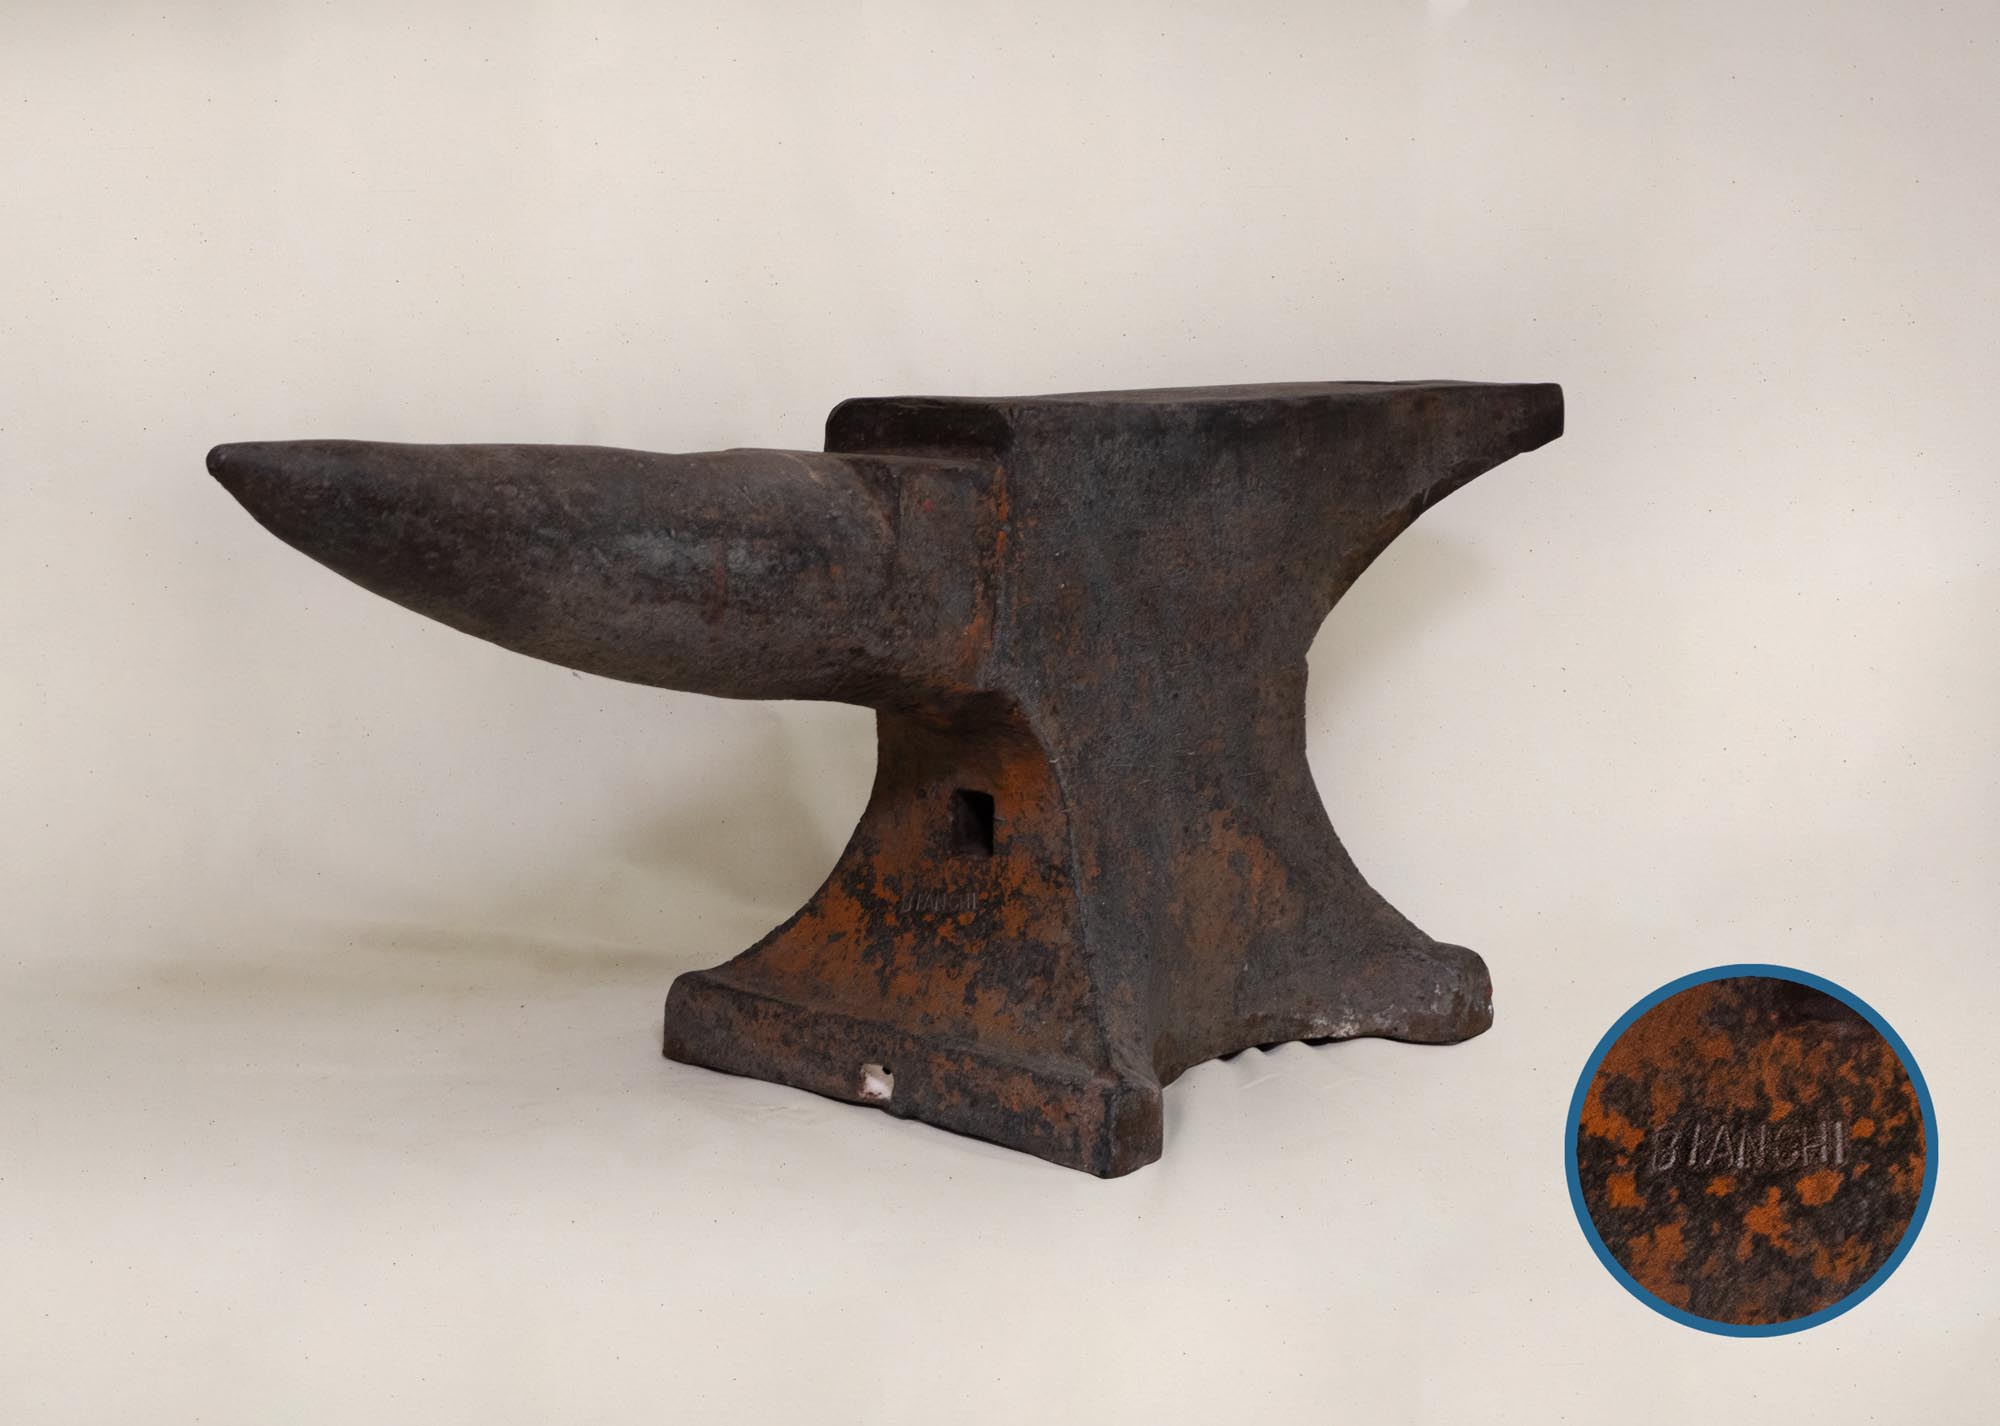 Anvil in the Ranching: Cattle Boom exhibit at the Museum of the Coastal Bend